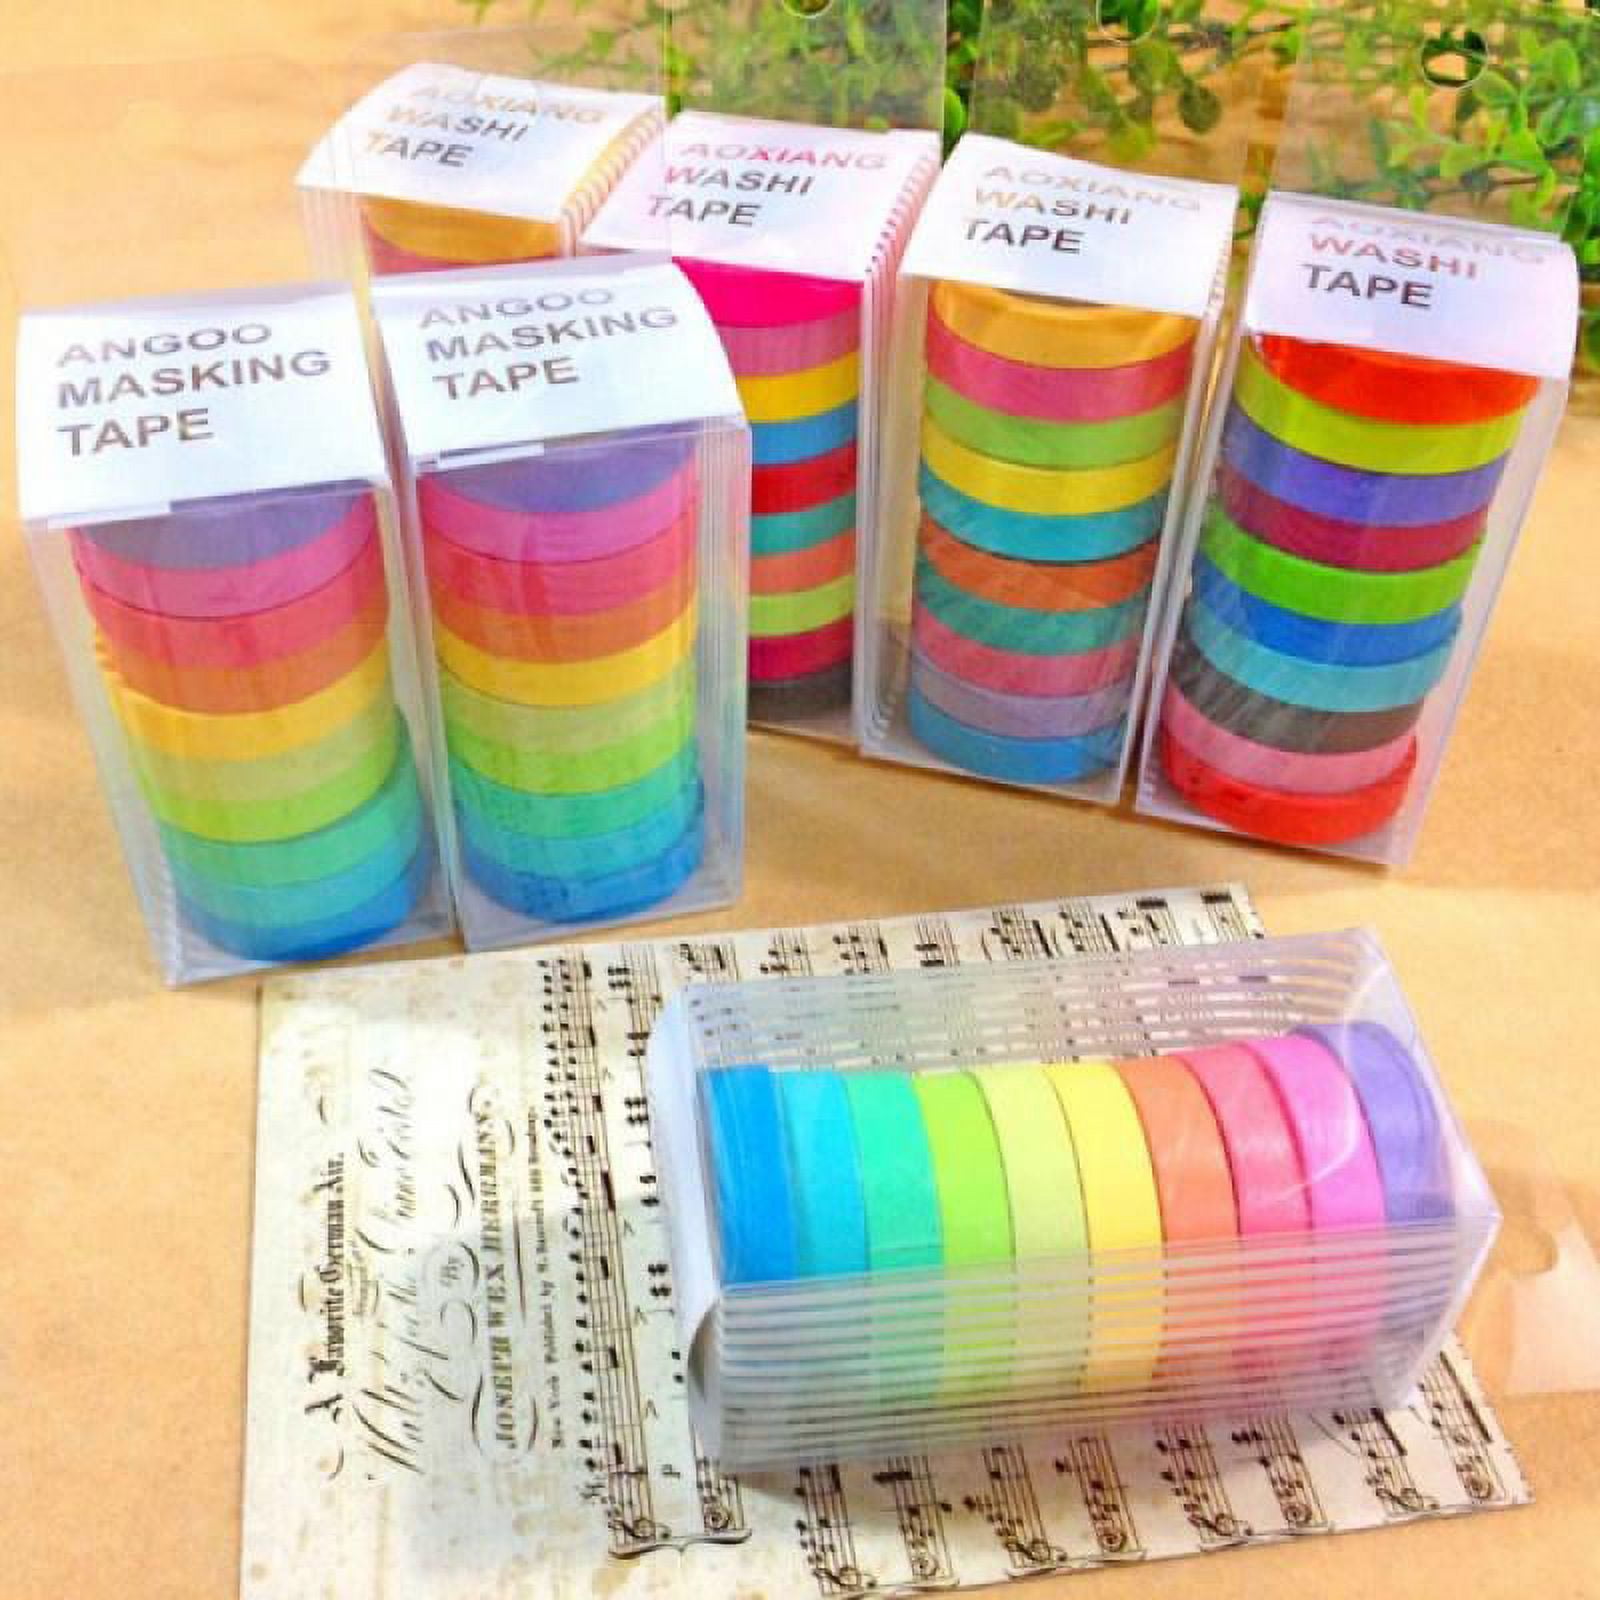 Color Masking Tape Rolls-7 Rolls 2.54 cm x 20 Yards (Approximately 20  Meters)-Color Teacher Tape, Suitable for Art, Labels, Classroom Decoration